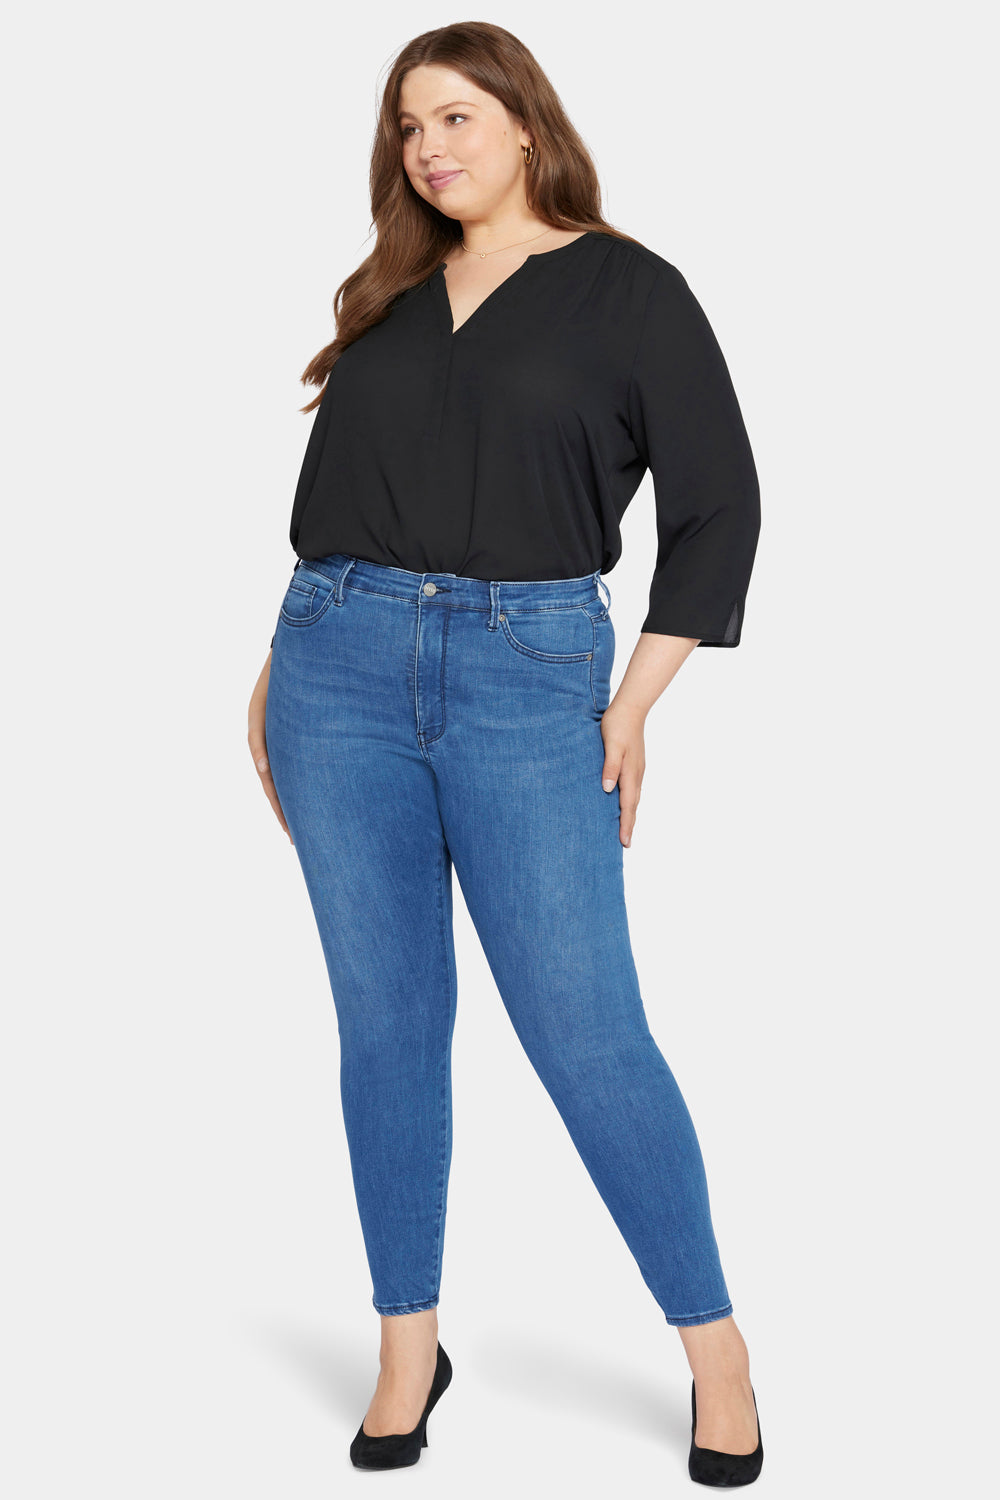 NYDJ Le Silhouette Ami Skinny Jeans In Plus Size With High Rise  - Amour